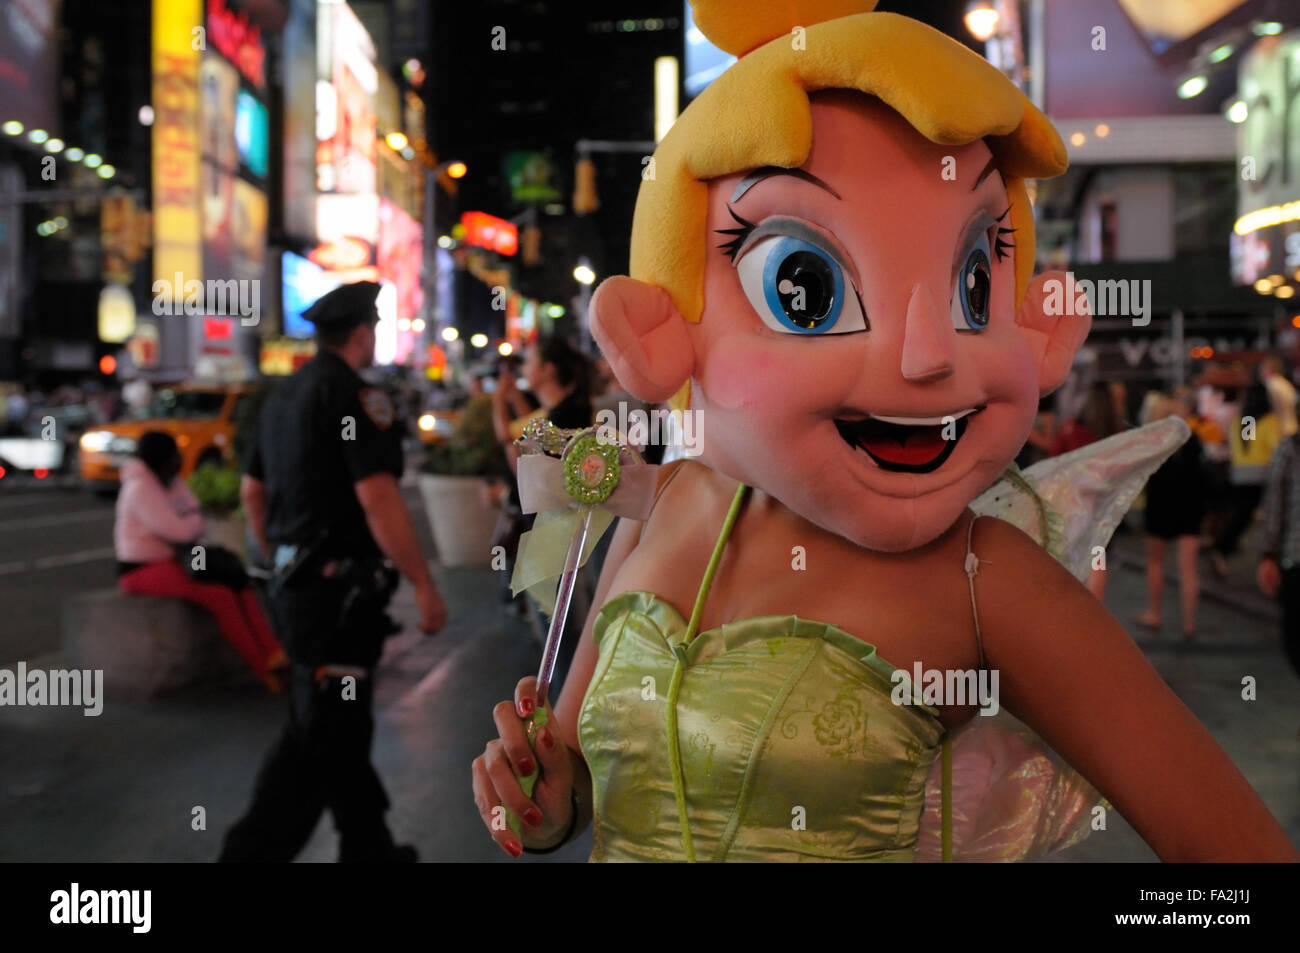 Tinkerbell am Times Square, New York, New York. Stockfoto